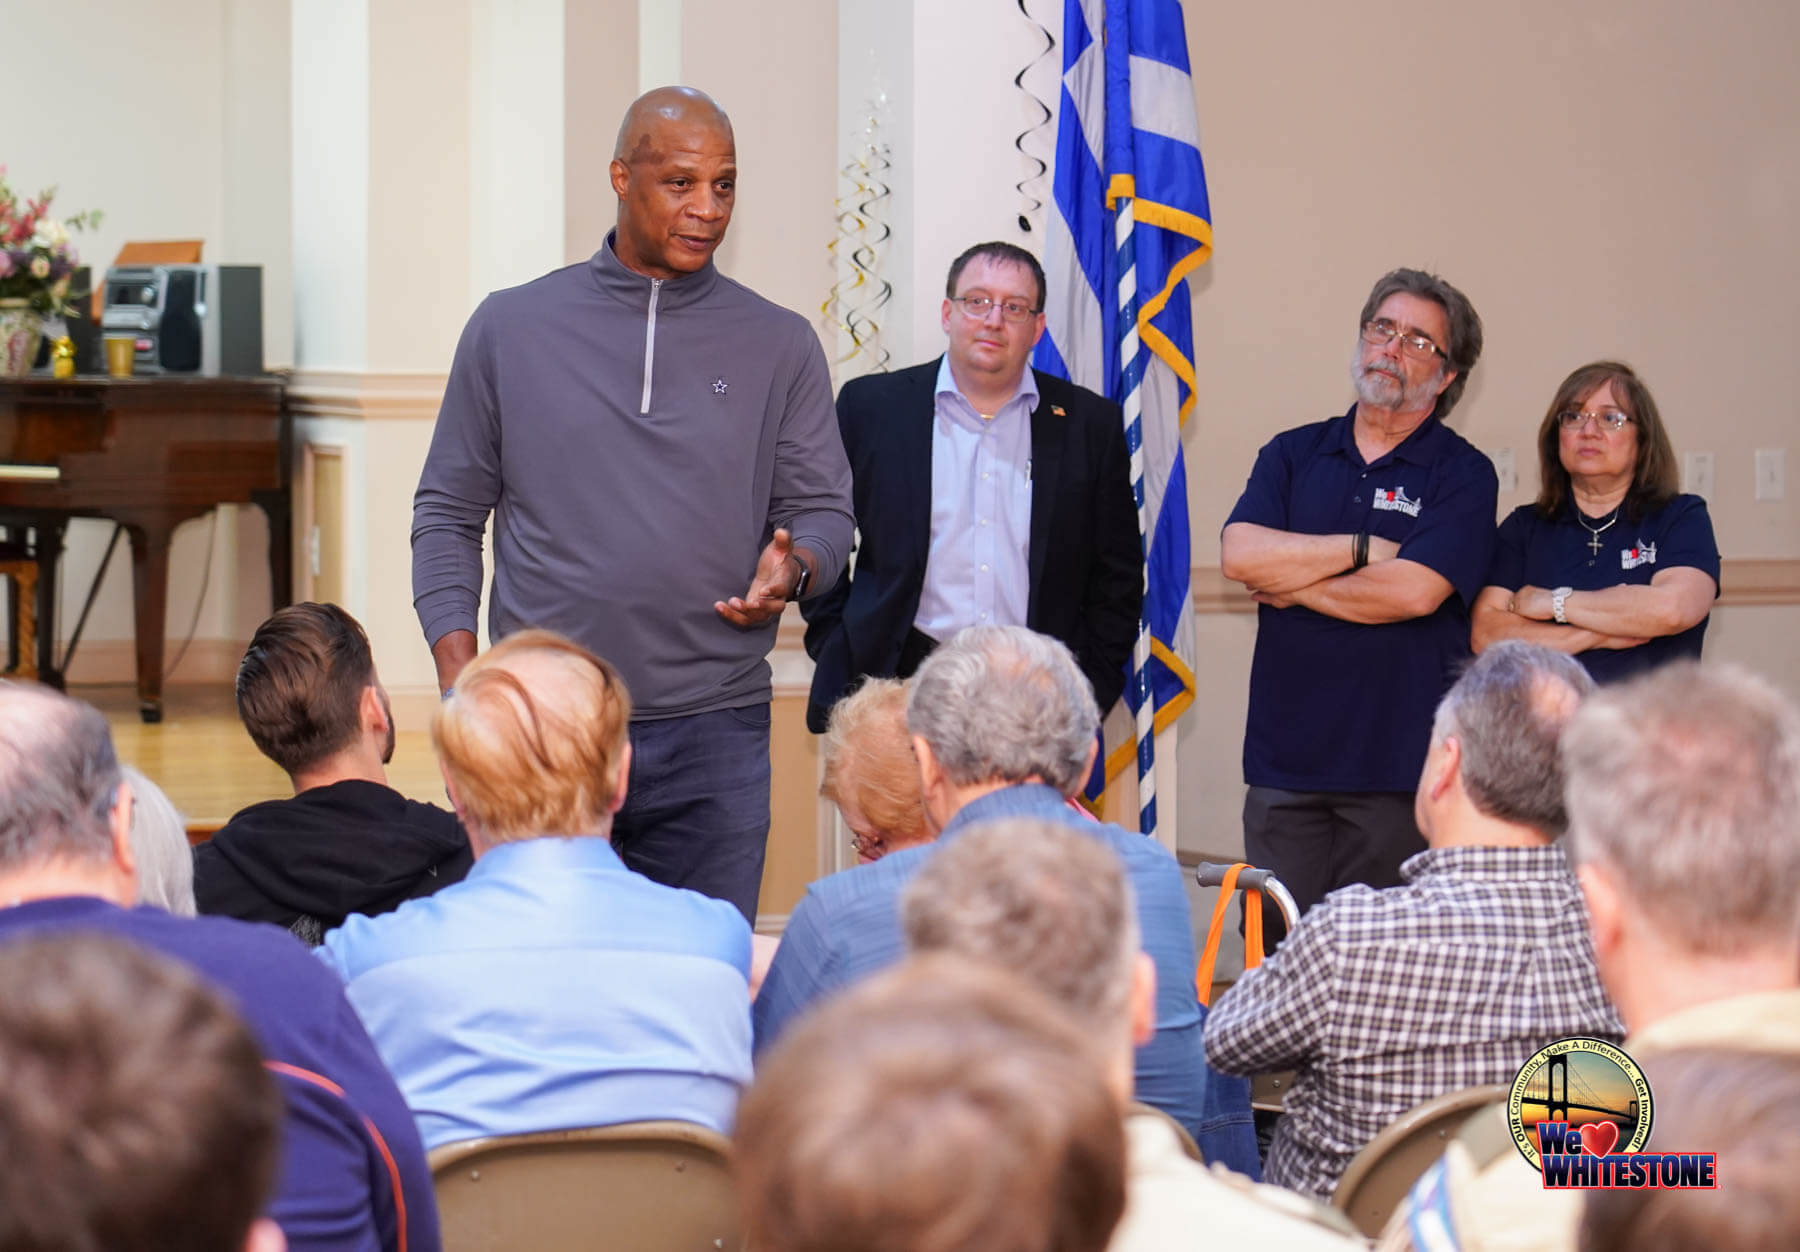 Don't give up on anyone': Former Mets great Darryl Strawberry speaks in  Whitestone about opioids & addiction –